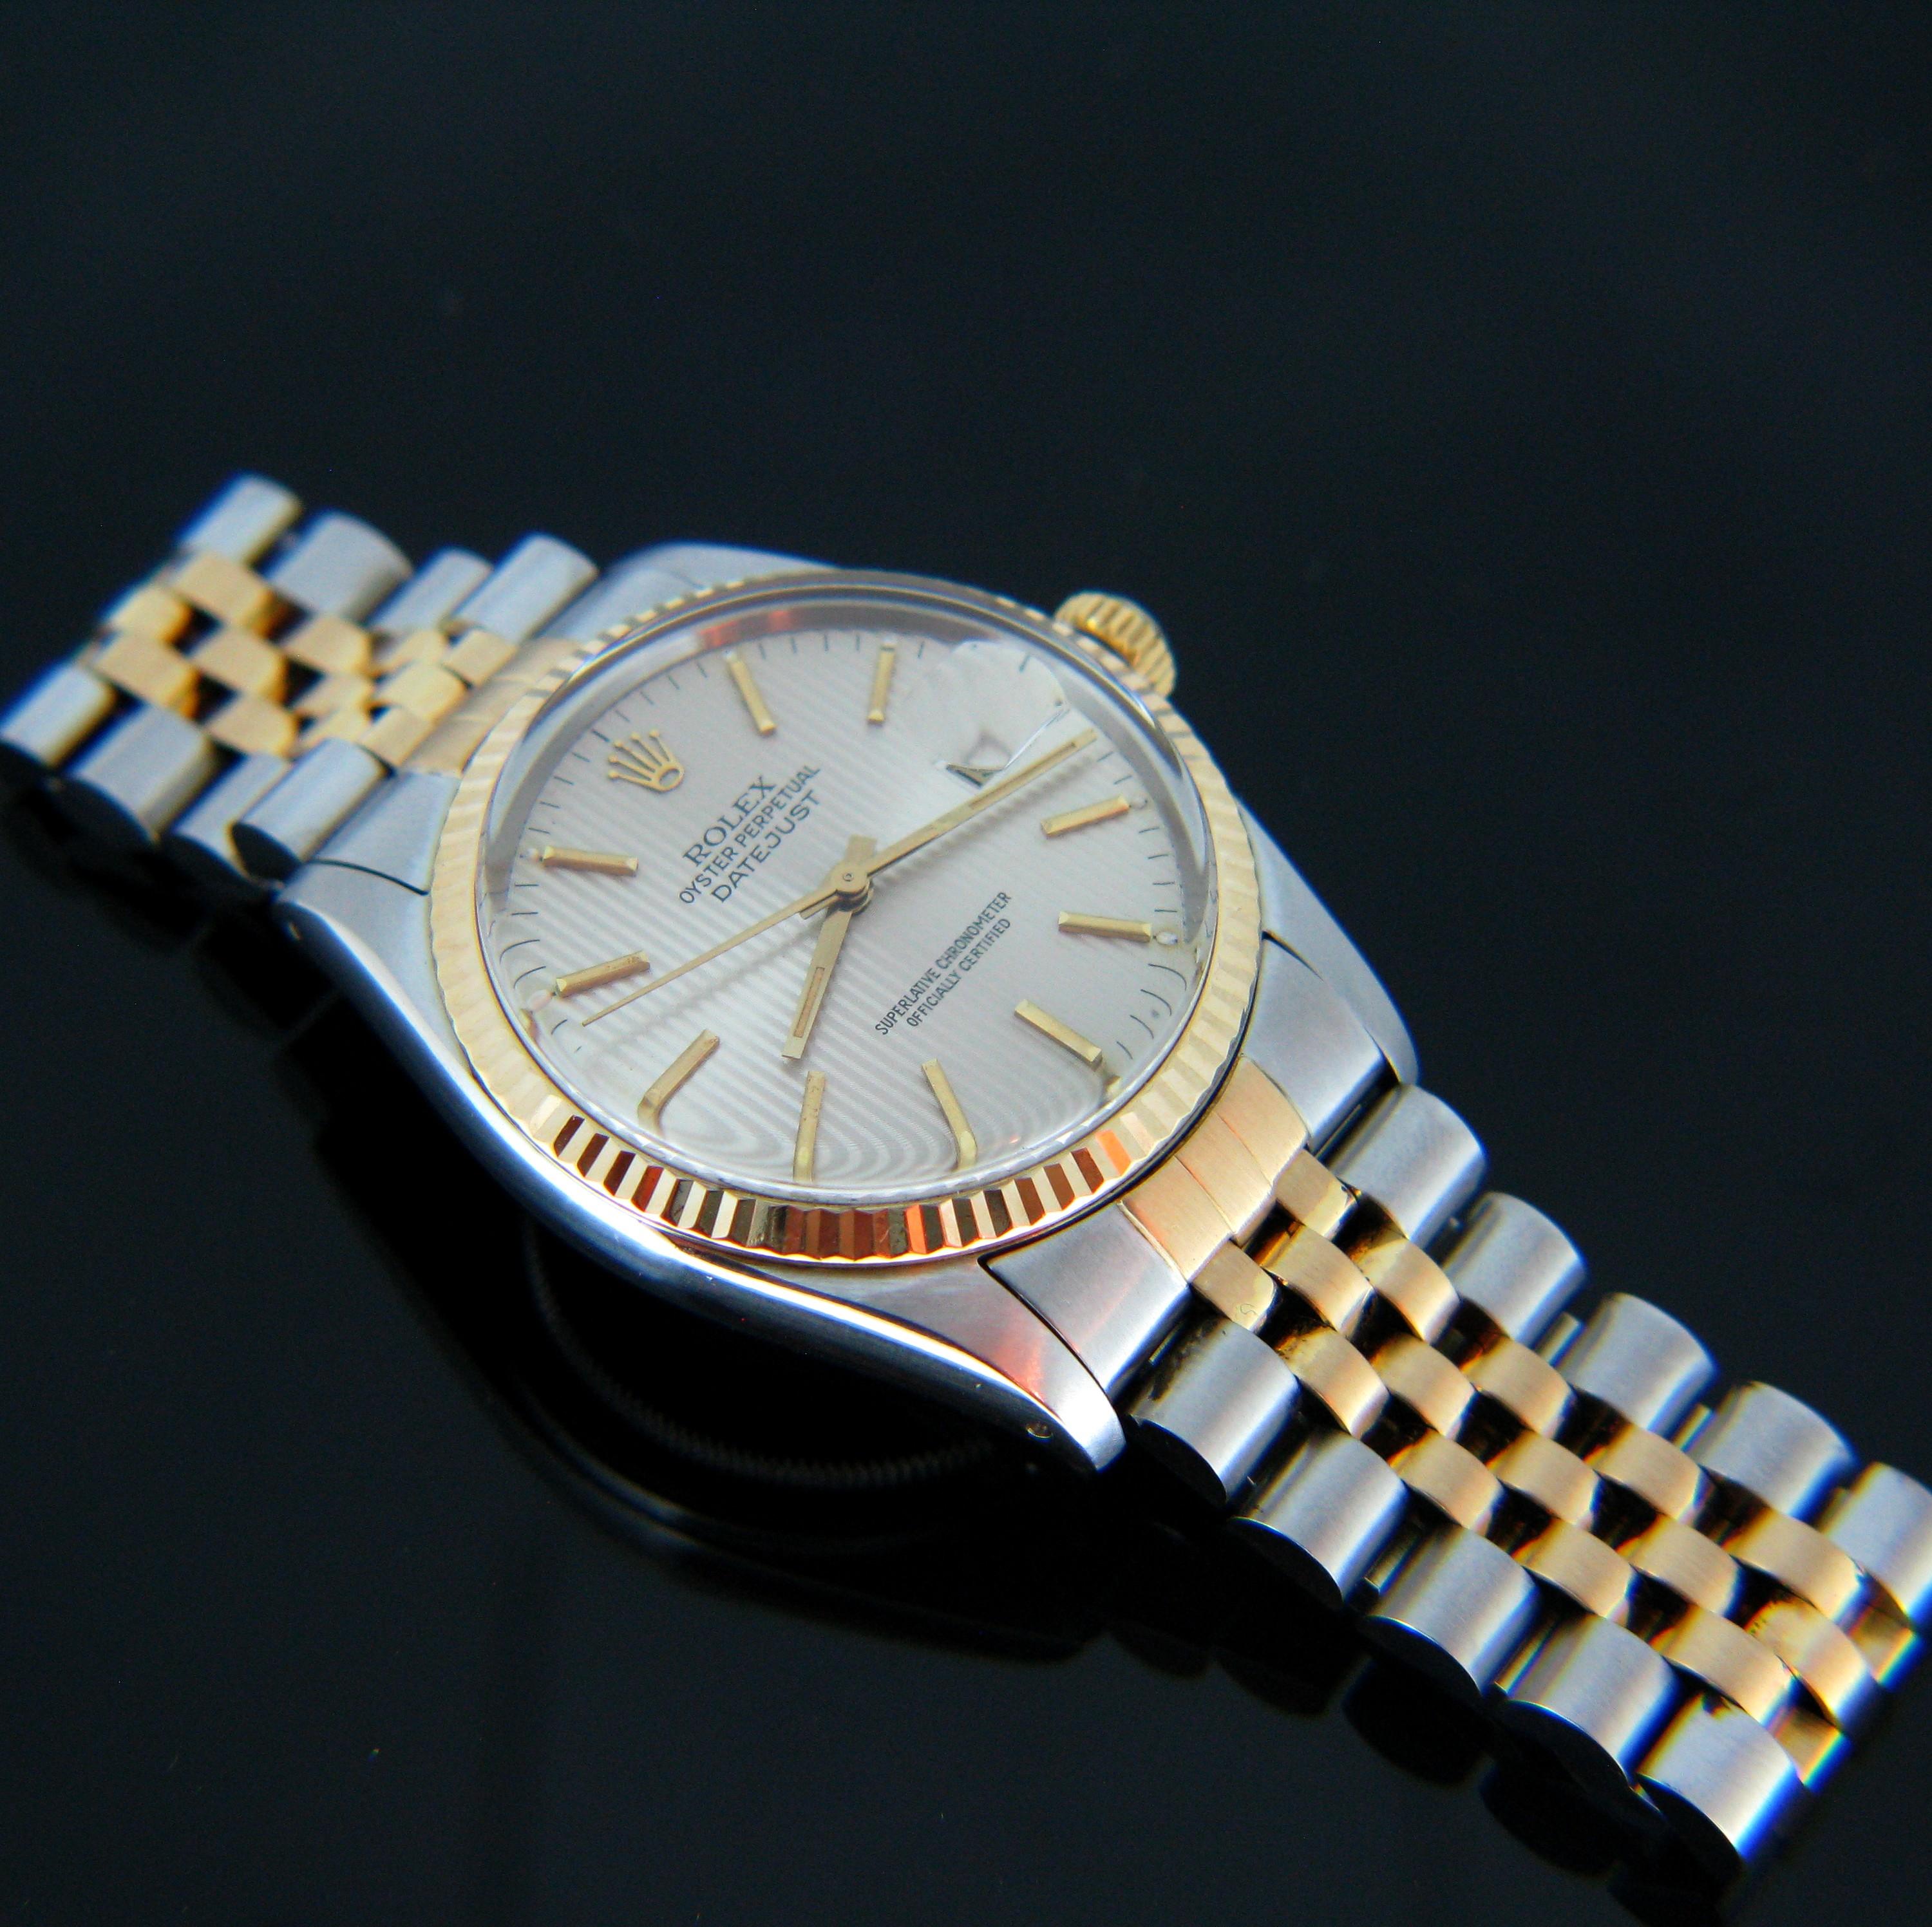 This Rolex Oyster Datejust 16000 watch is made  in 18K yellow gold and stainless steel. It is in perfect condition and works perfectly as it was fully restored. It comes with its Rolex box.

Total Weight:	98.3 g

Metal:		18K yellow gold & stainless